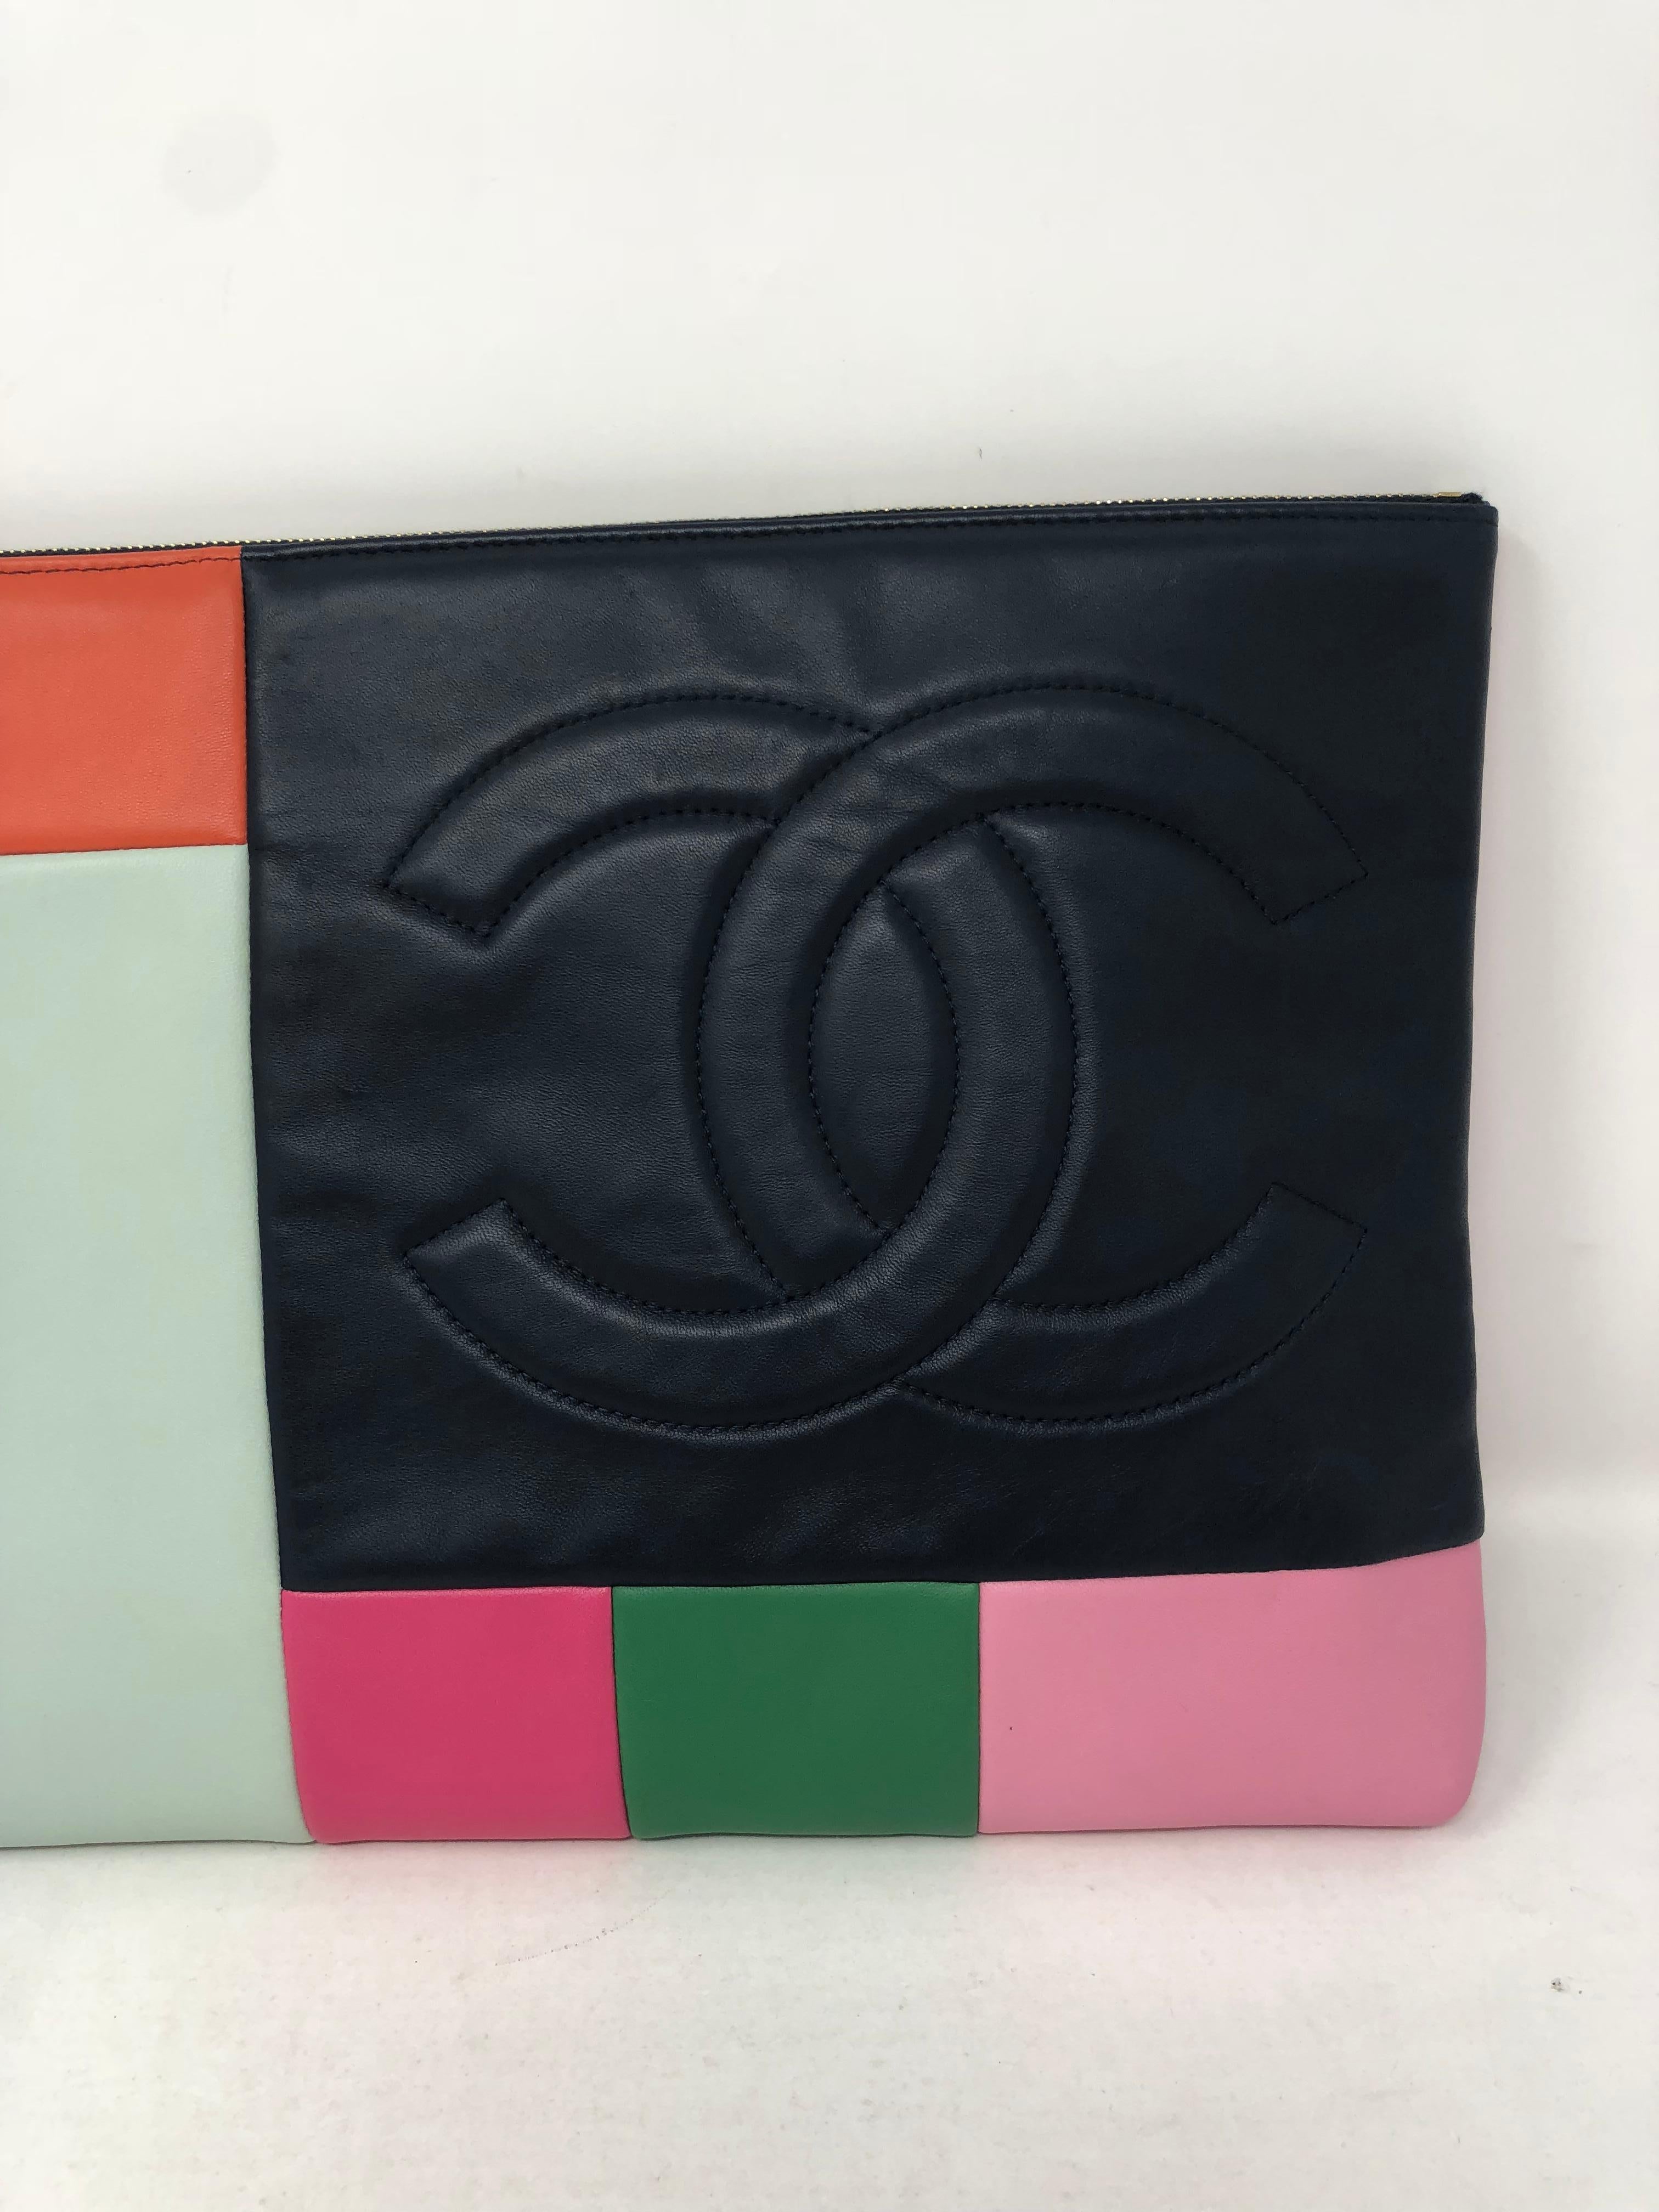 Chanel Color-block Clutch in mint condition. All leather blocks of color make up this beautiful bag. Fits an ipad too. Versatile look and bigger clutch. Guaranteed authentic. 